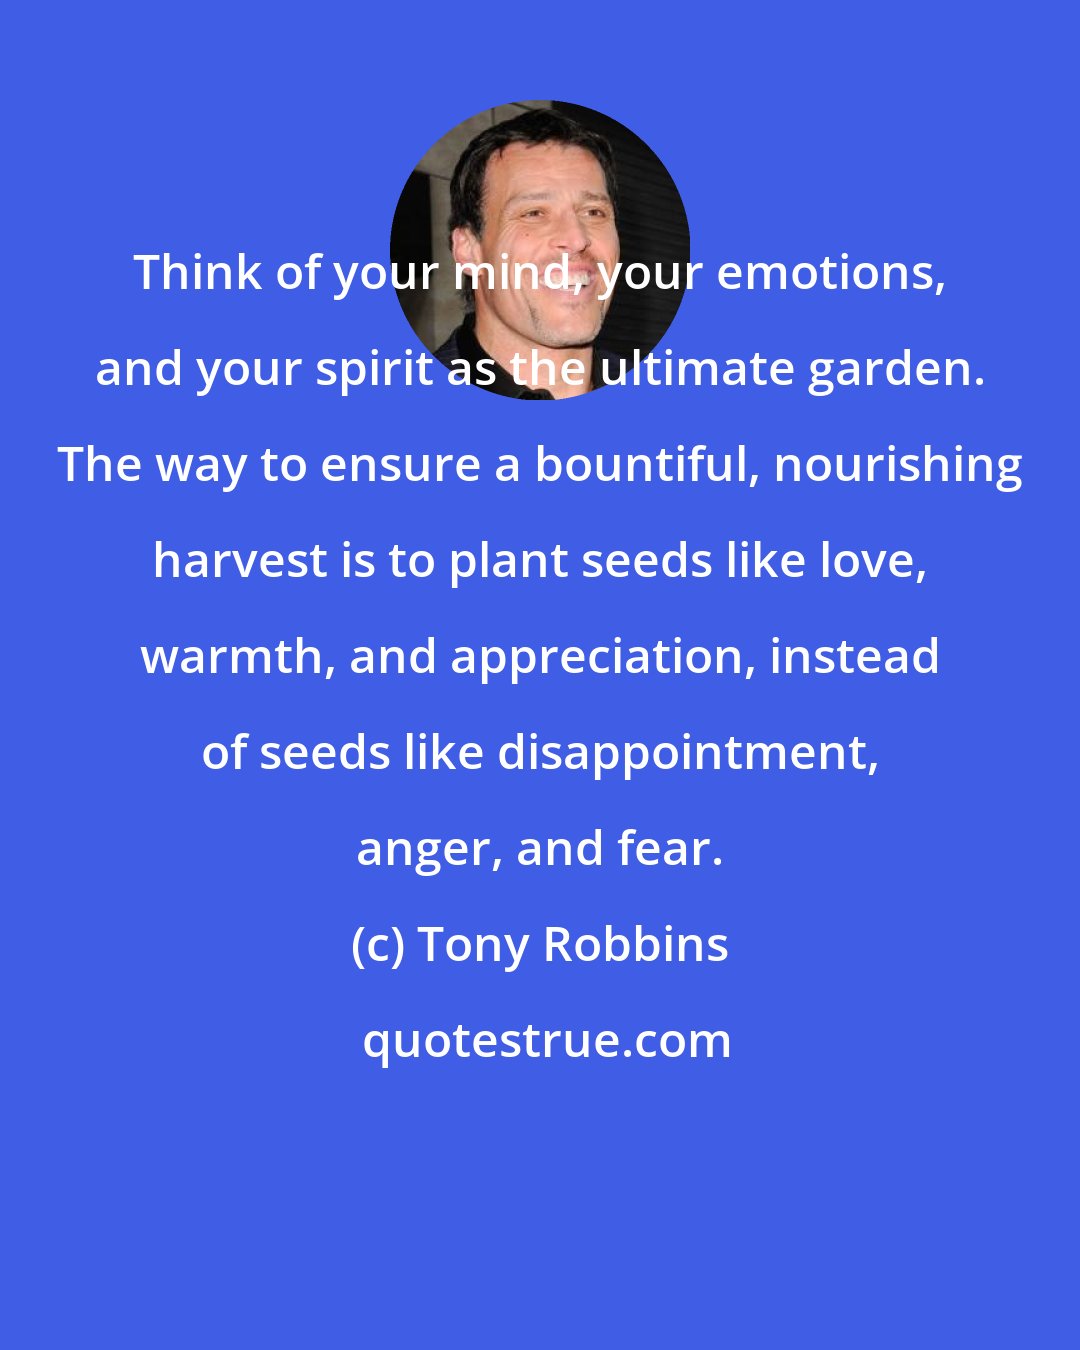 Tony Robbins: Think of your mind, your emotions, and your spirit as the ultimate garden. The way to ensure a bountiful, nourishing harvest is to plant seeds like love, warmth, and appreciation, instead of seeds like disappointment, anger, and fear.